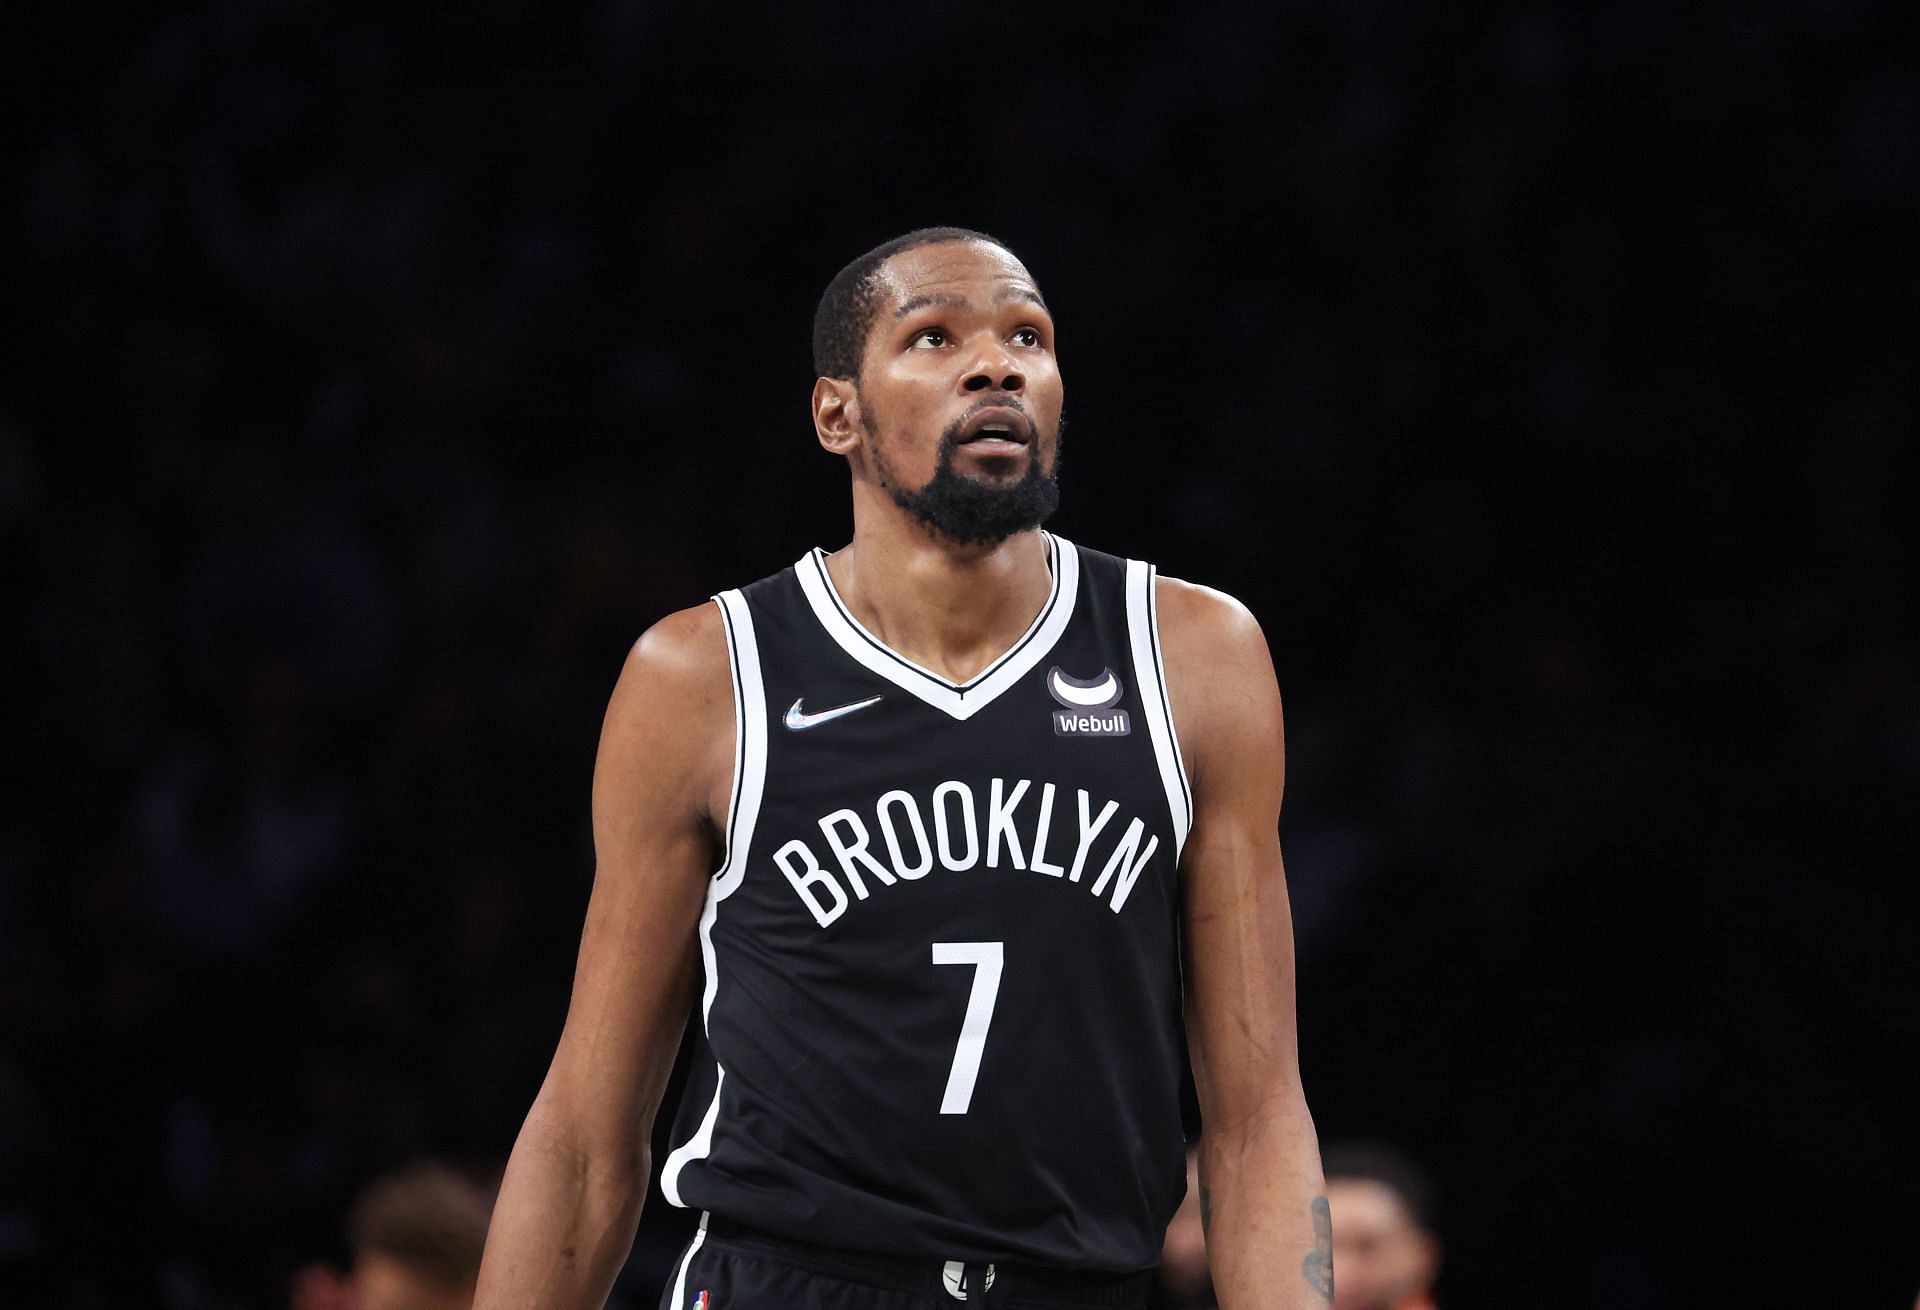 Kevin Durant #7 of the Brooklyn Nets looks on against the Boston Celtics during Game Three of the Eastern Conference First Round NBA Playoffs at Barclays Center on April 23, 2022 in New York City.